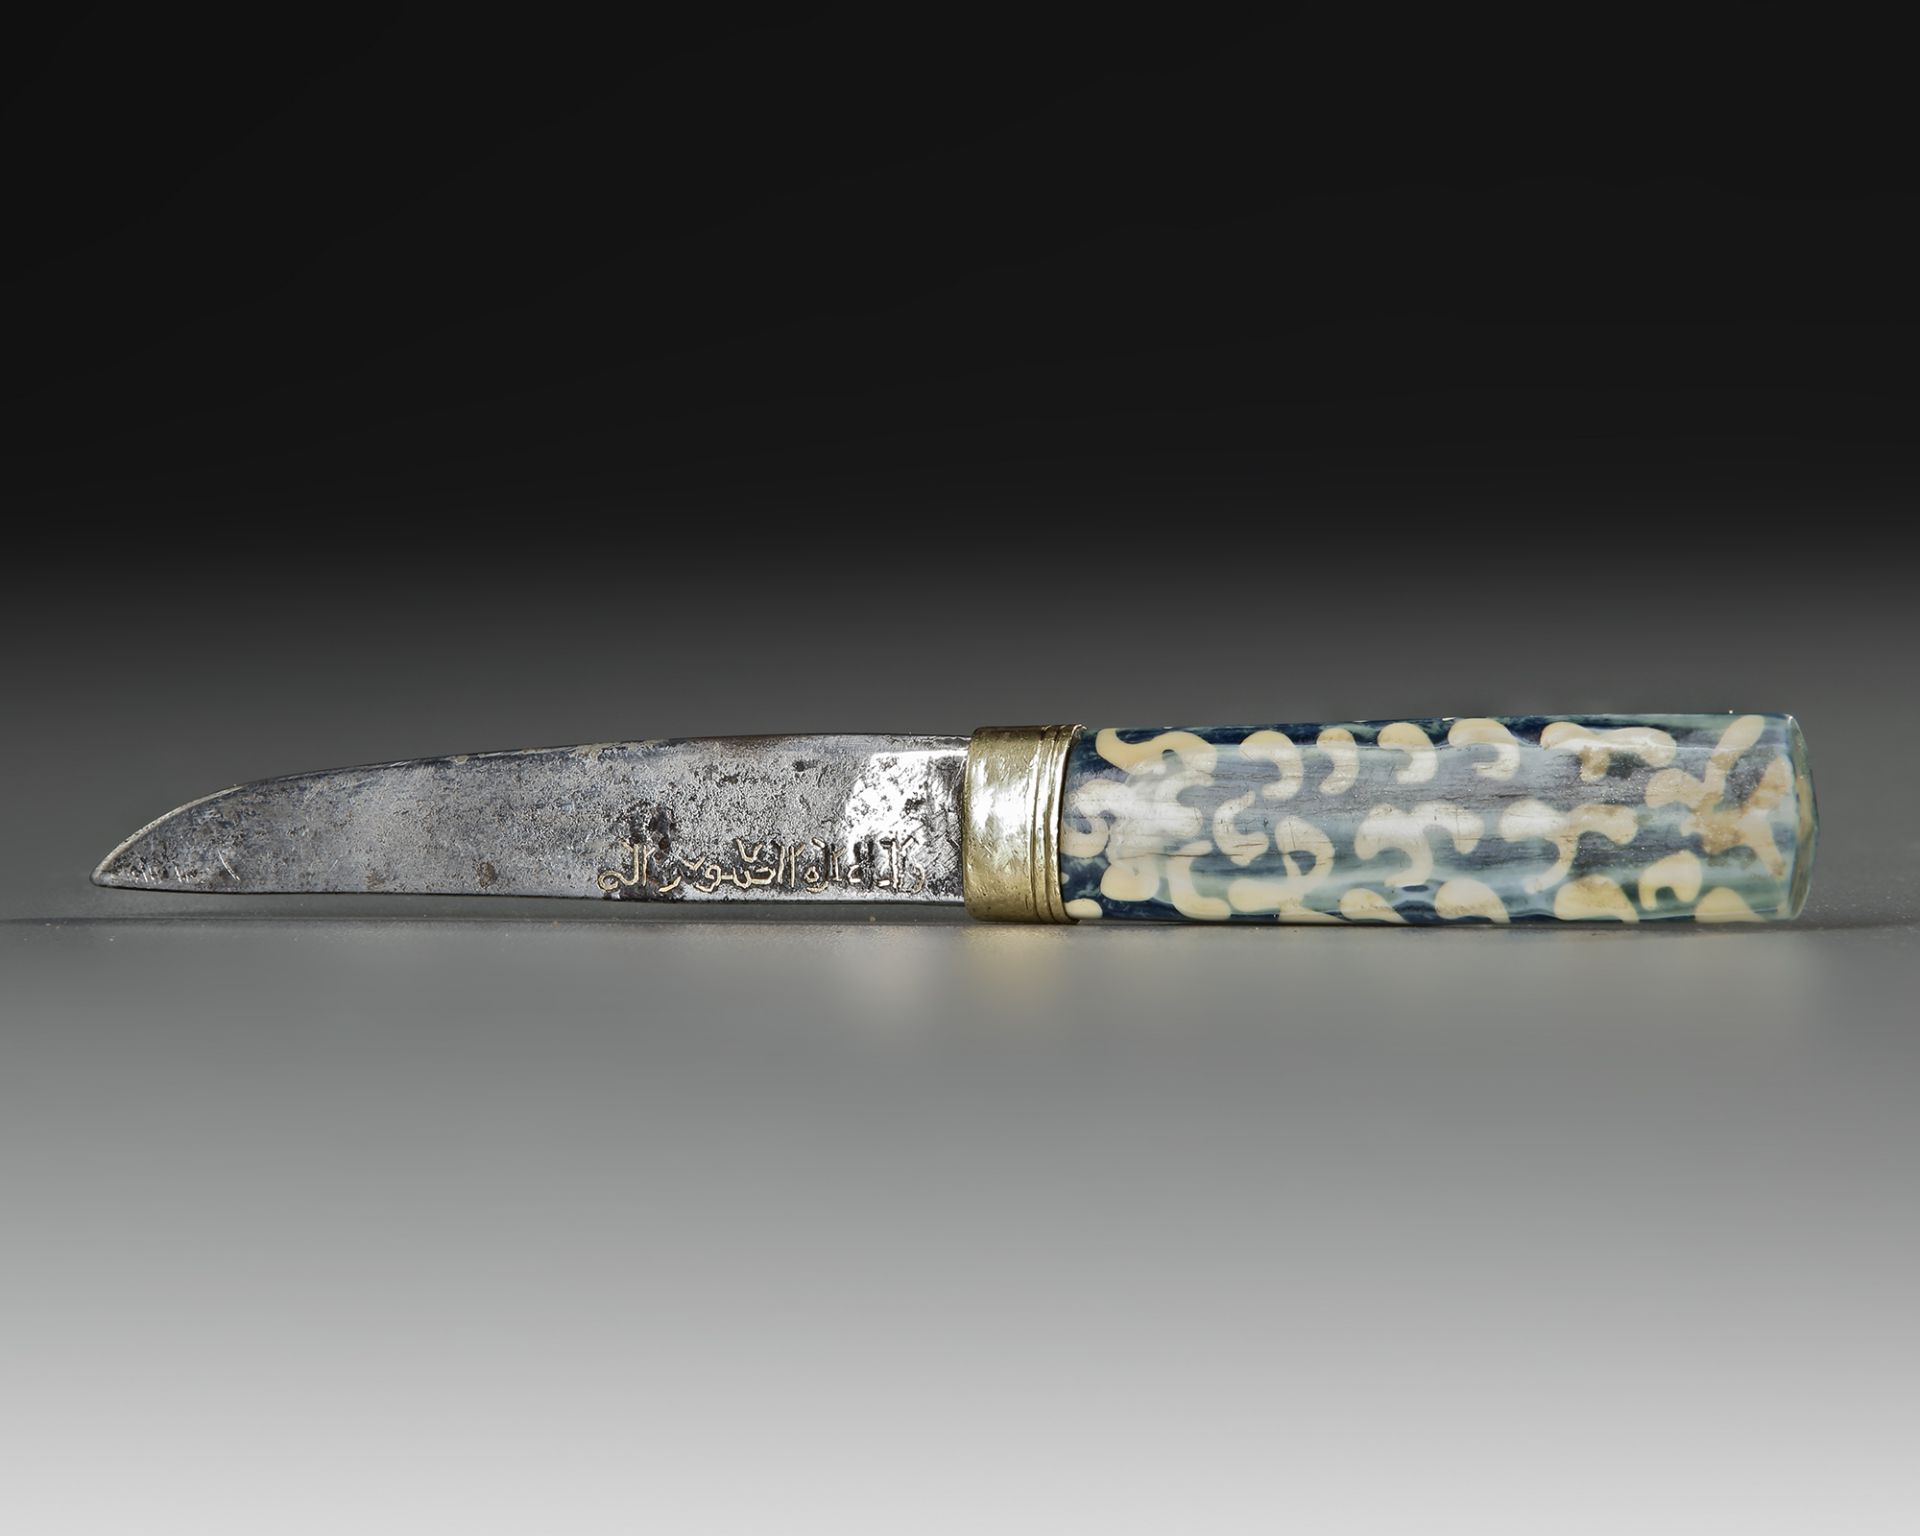 A SMALL INSCRIBED KNIFE, LATE TIMURID, 15TH-16TH CENTURY - Image 6 of 12